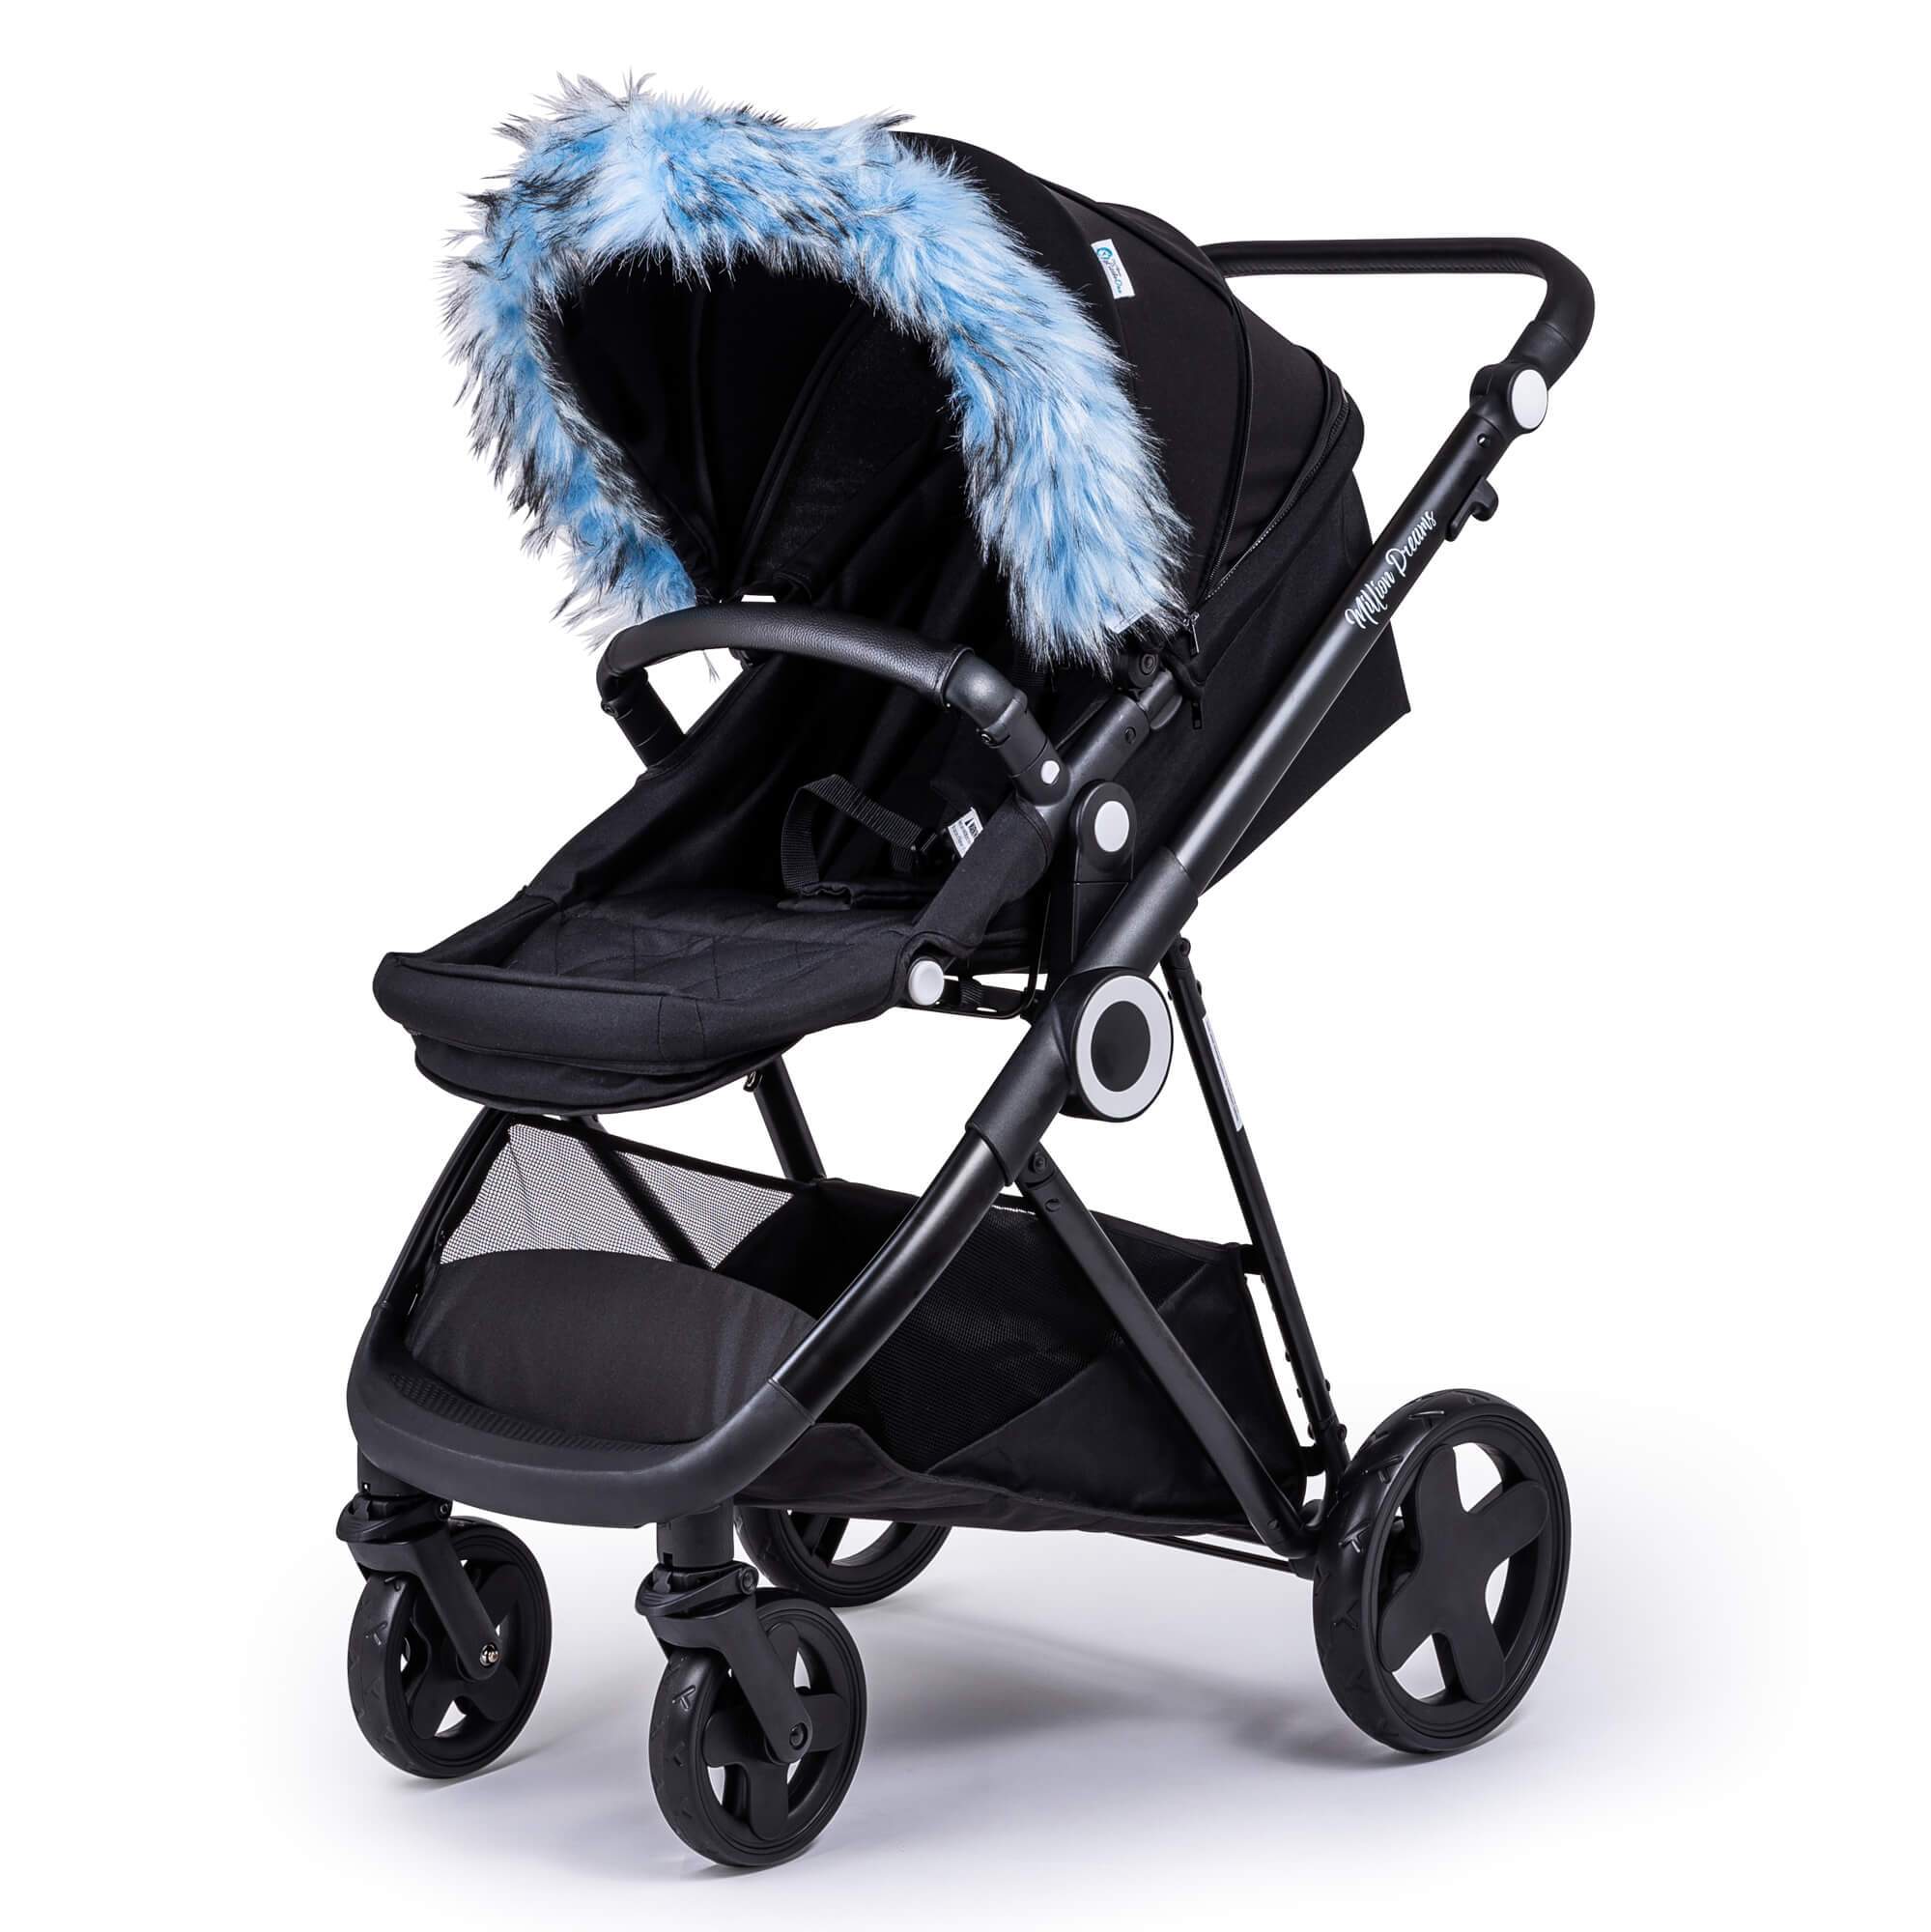 Pram Fur Hood Trim Attachment for Pushchair Compatible with Bugaboo - Light Blue / Fits All Models | For Your Little One